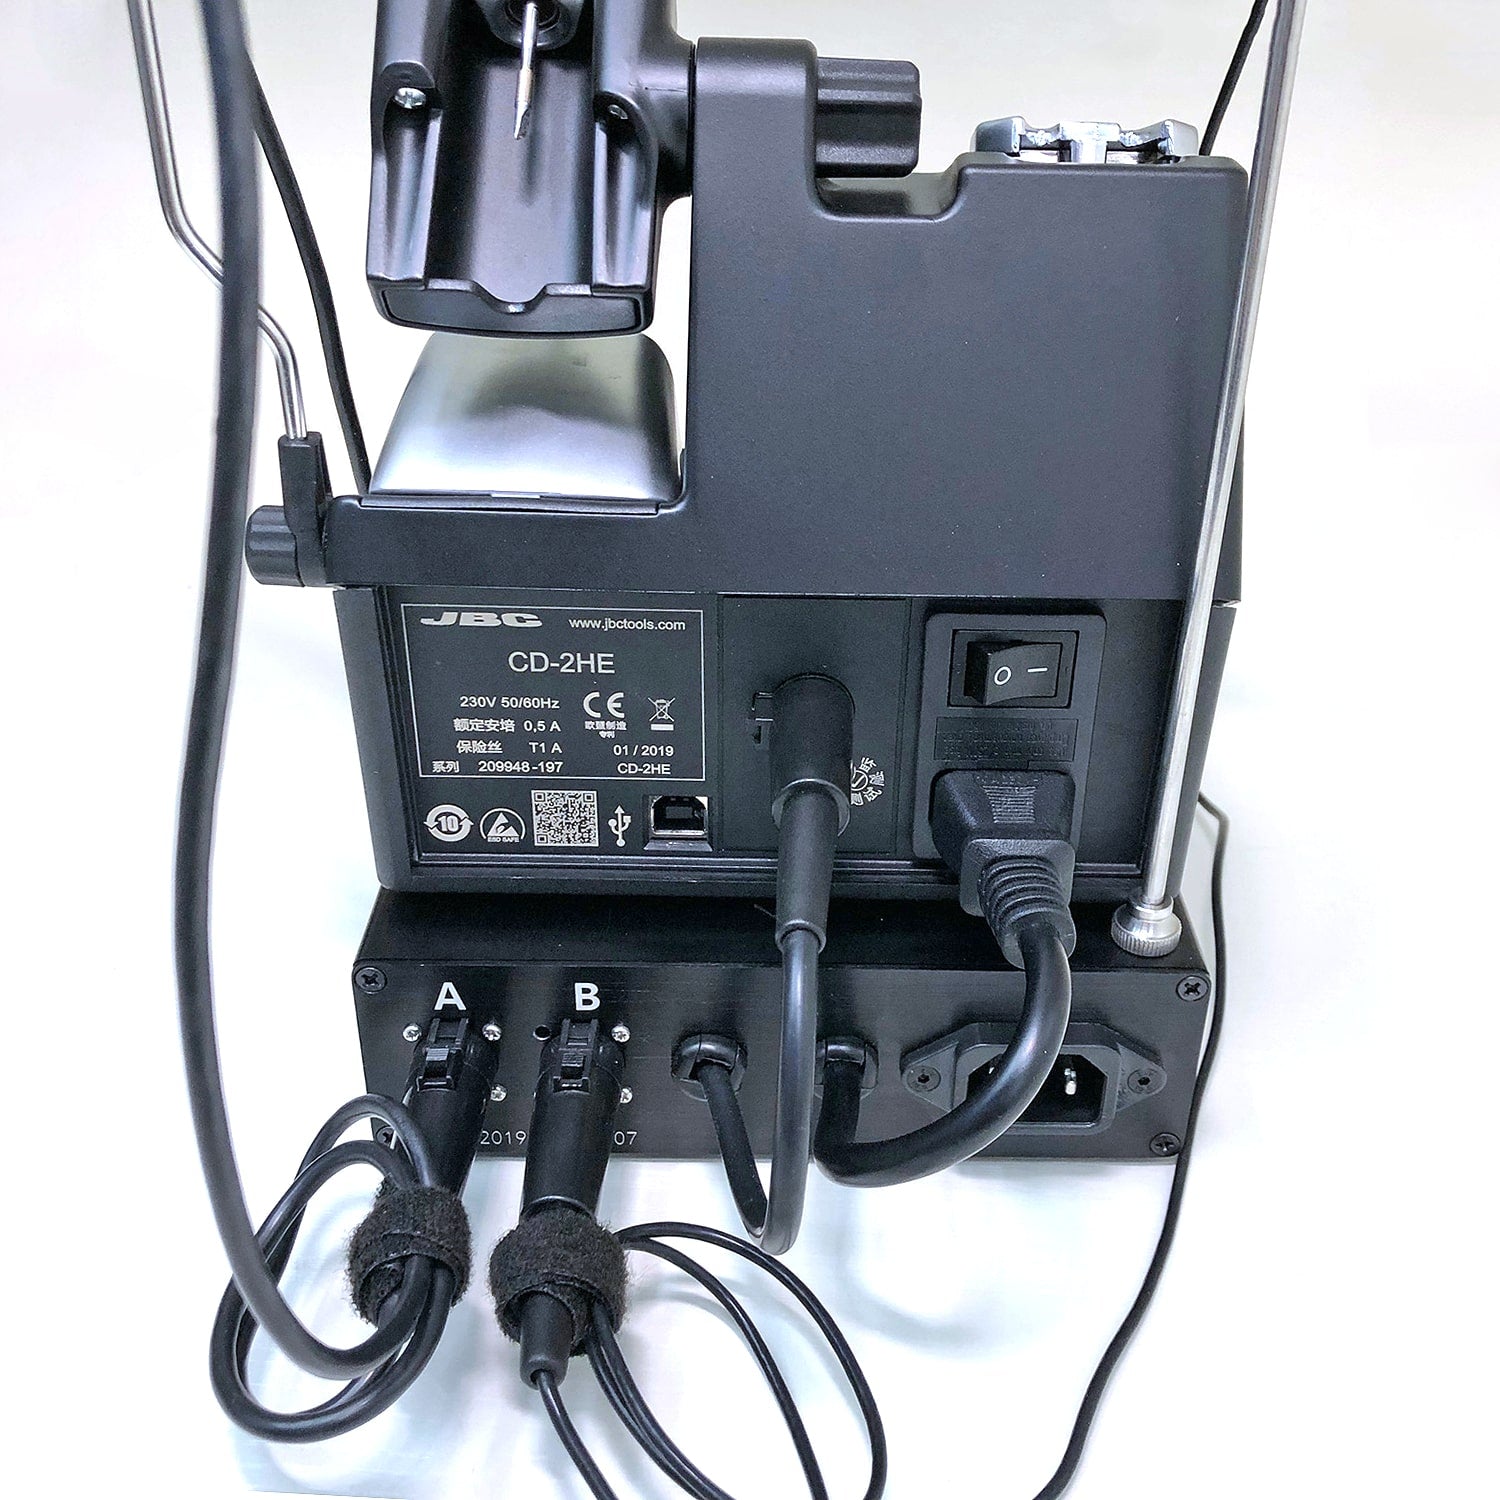 TEC EXTENSION MODULE WITH T210 HOLDER FOR JBC SOLDERING STATION